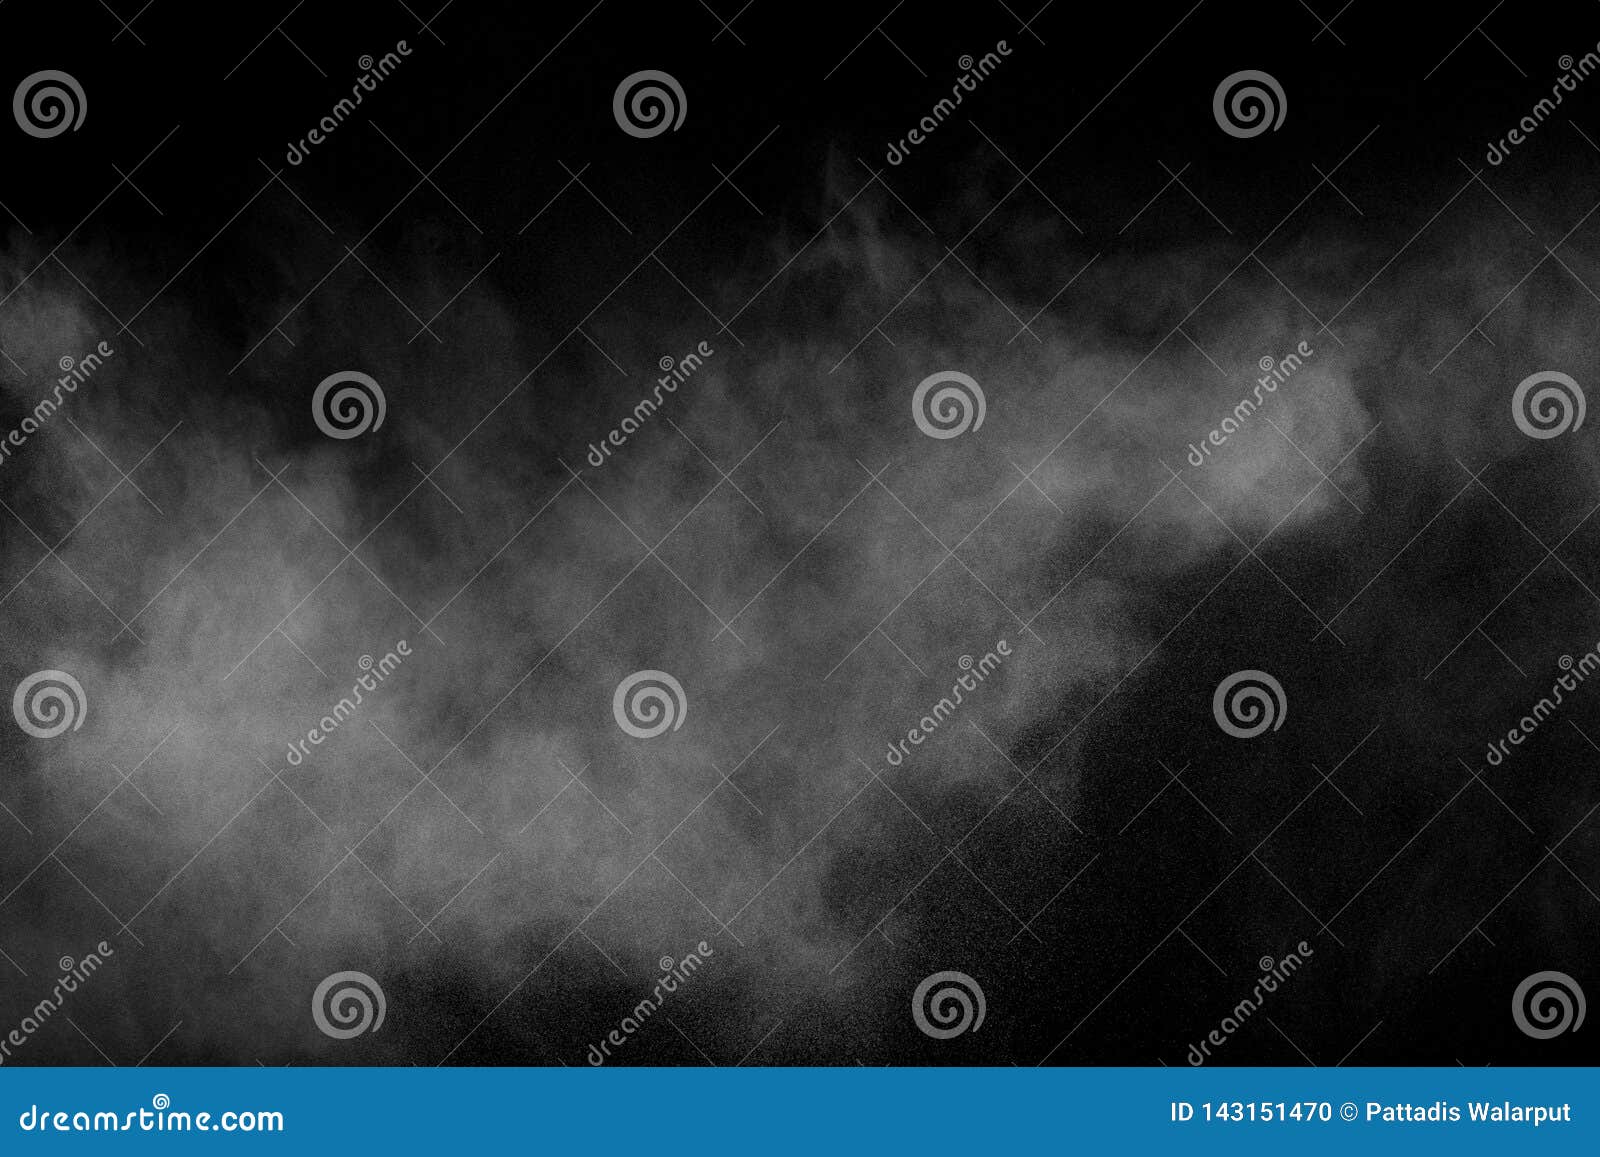 abstract white powder explosion against black background.white dust exhale in the air